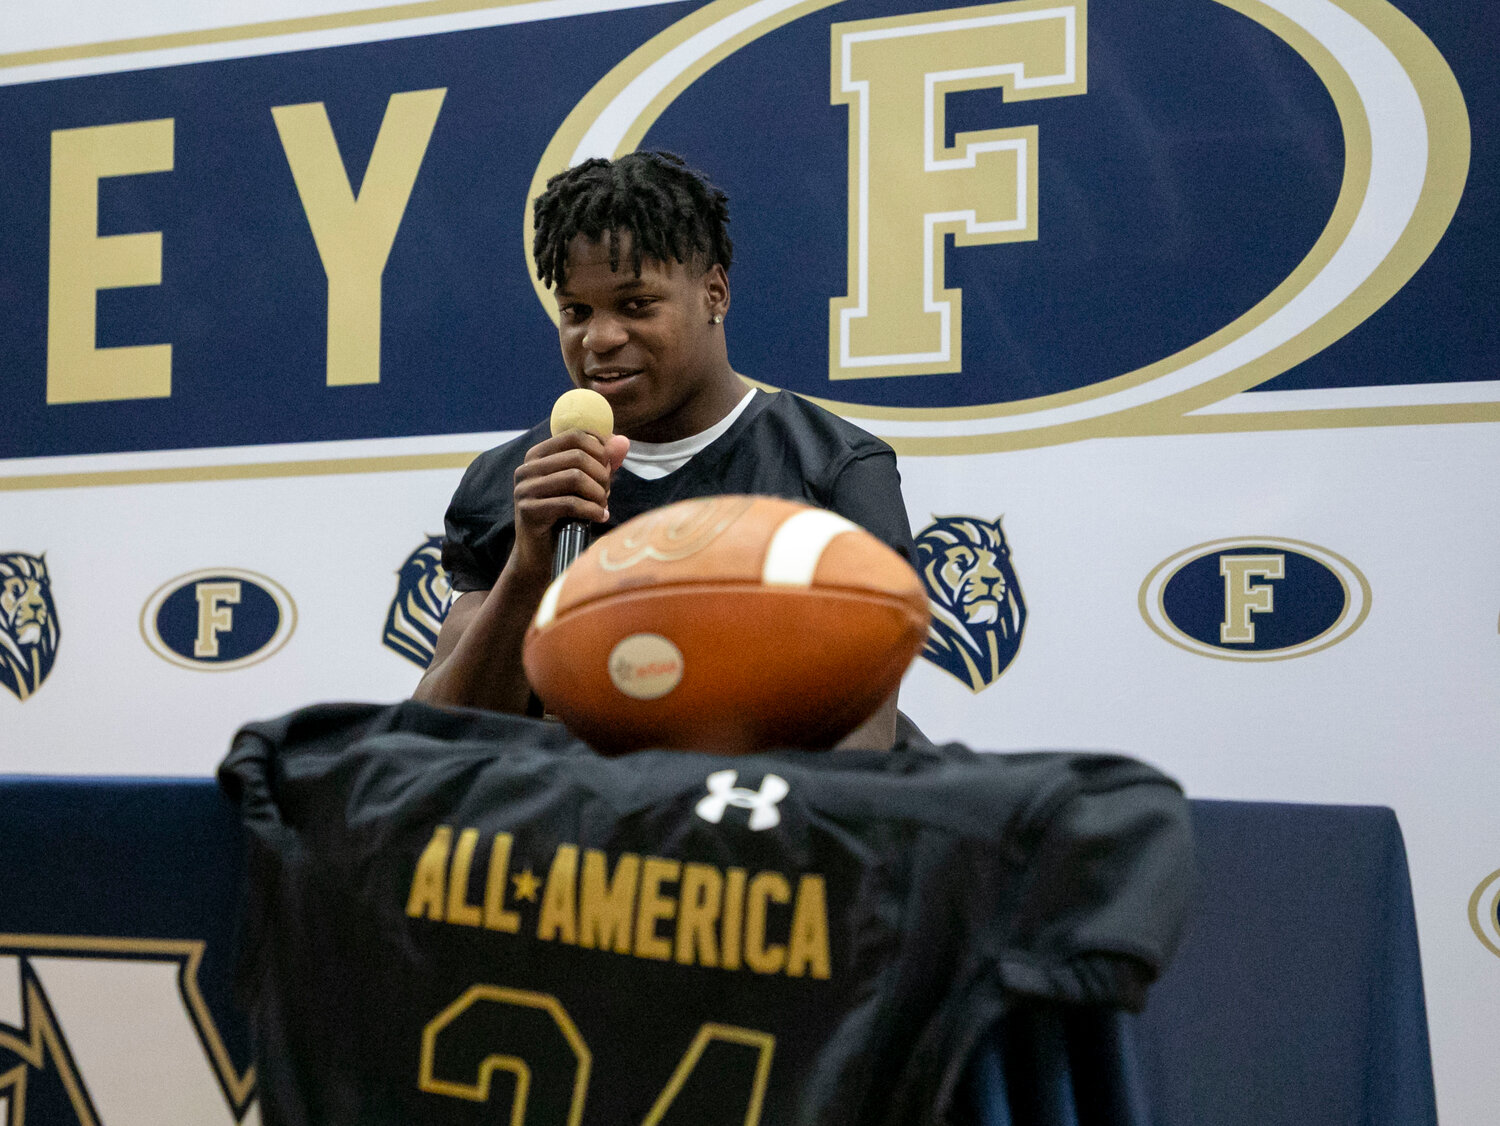 Lion senior Perry Thompson addresses the crowd on hand during Friday’s ceremony at Foley High School where he received his Under Armour All-America jersey. Thompson said he looked forward to representing his school and seeing what his talents do against the top high school prospects in the nation.